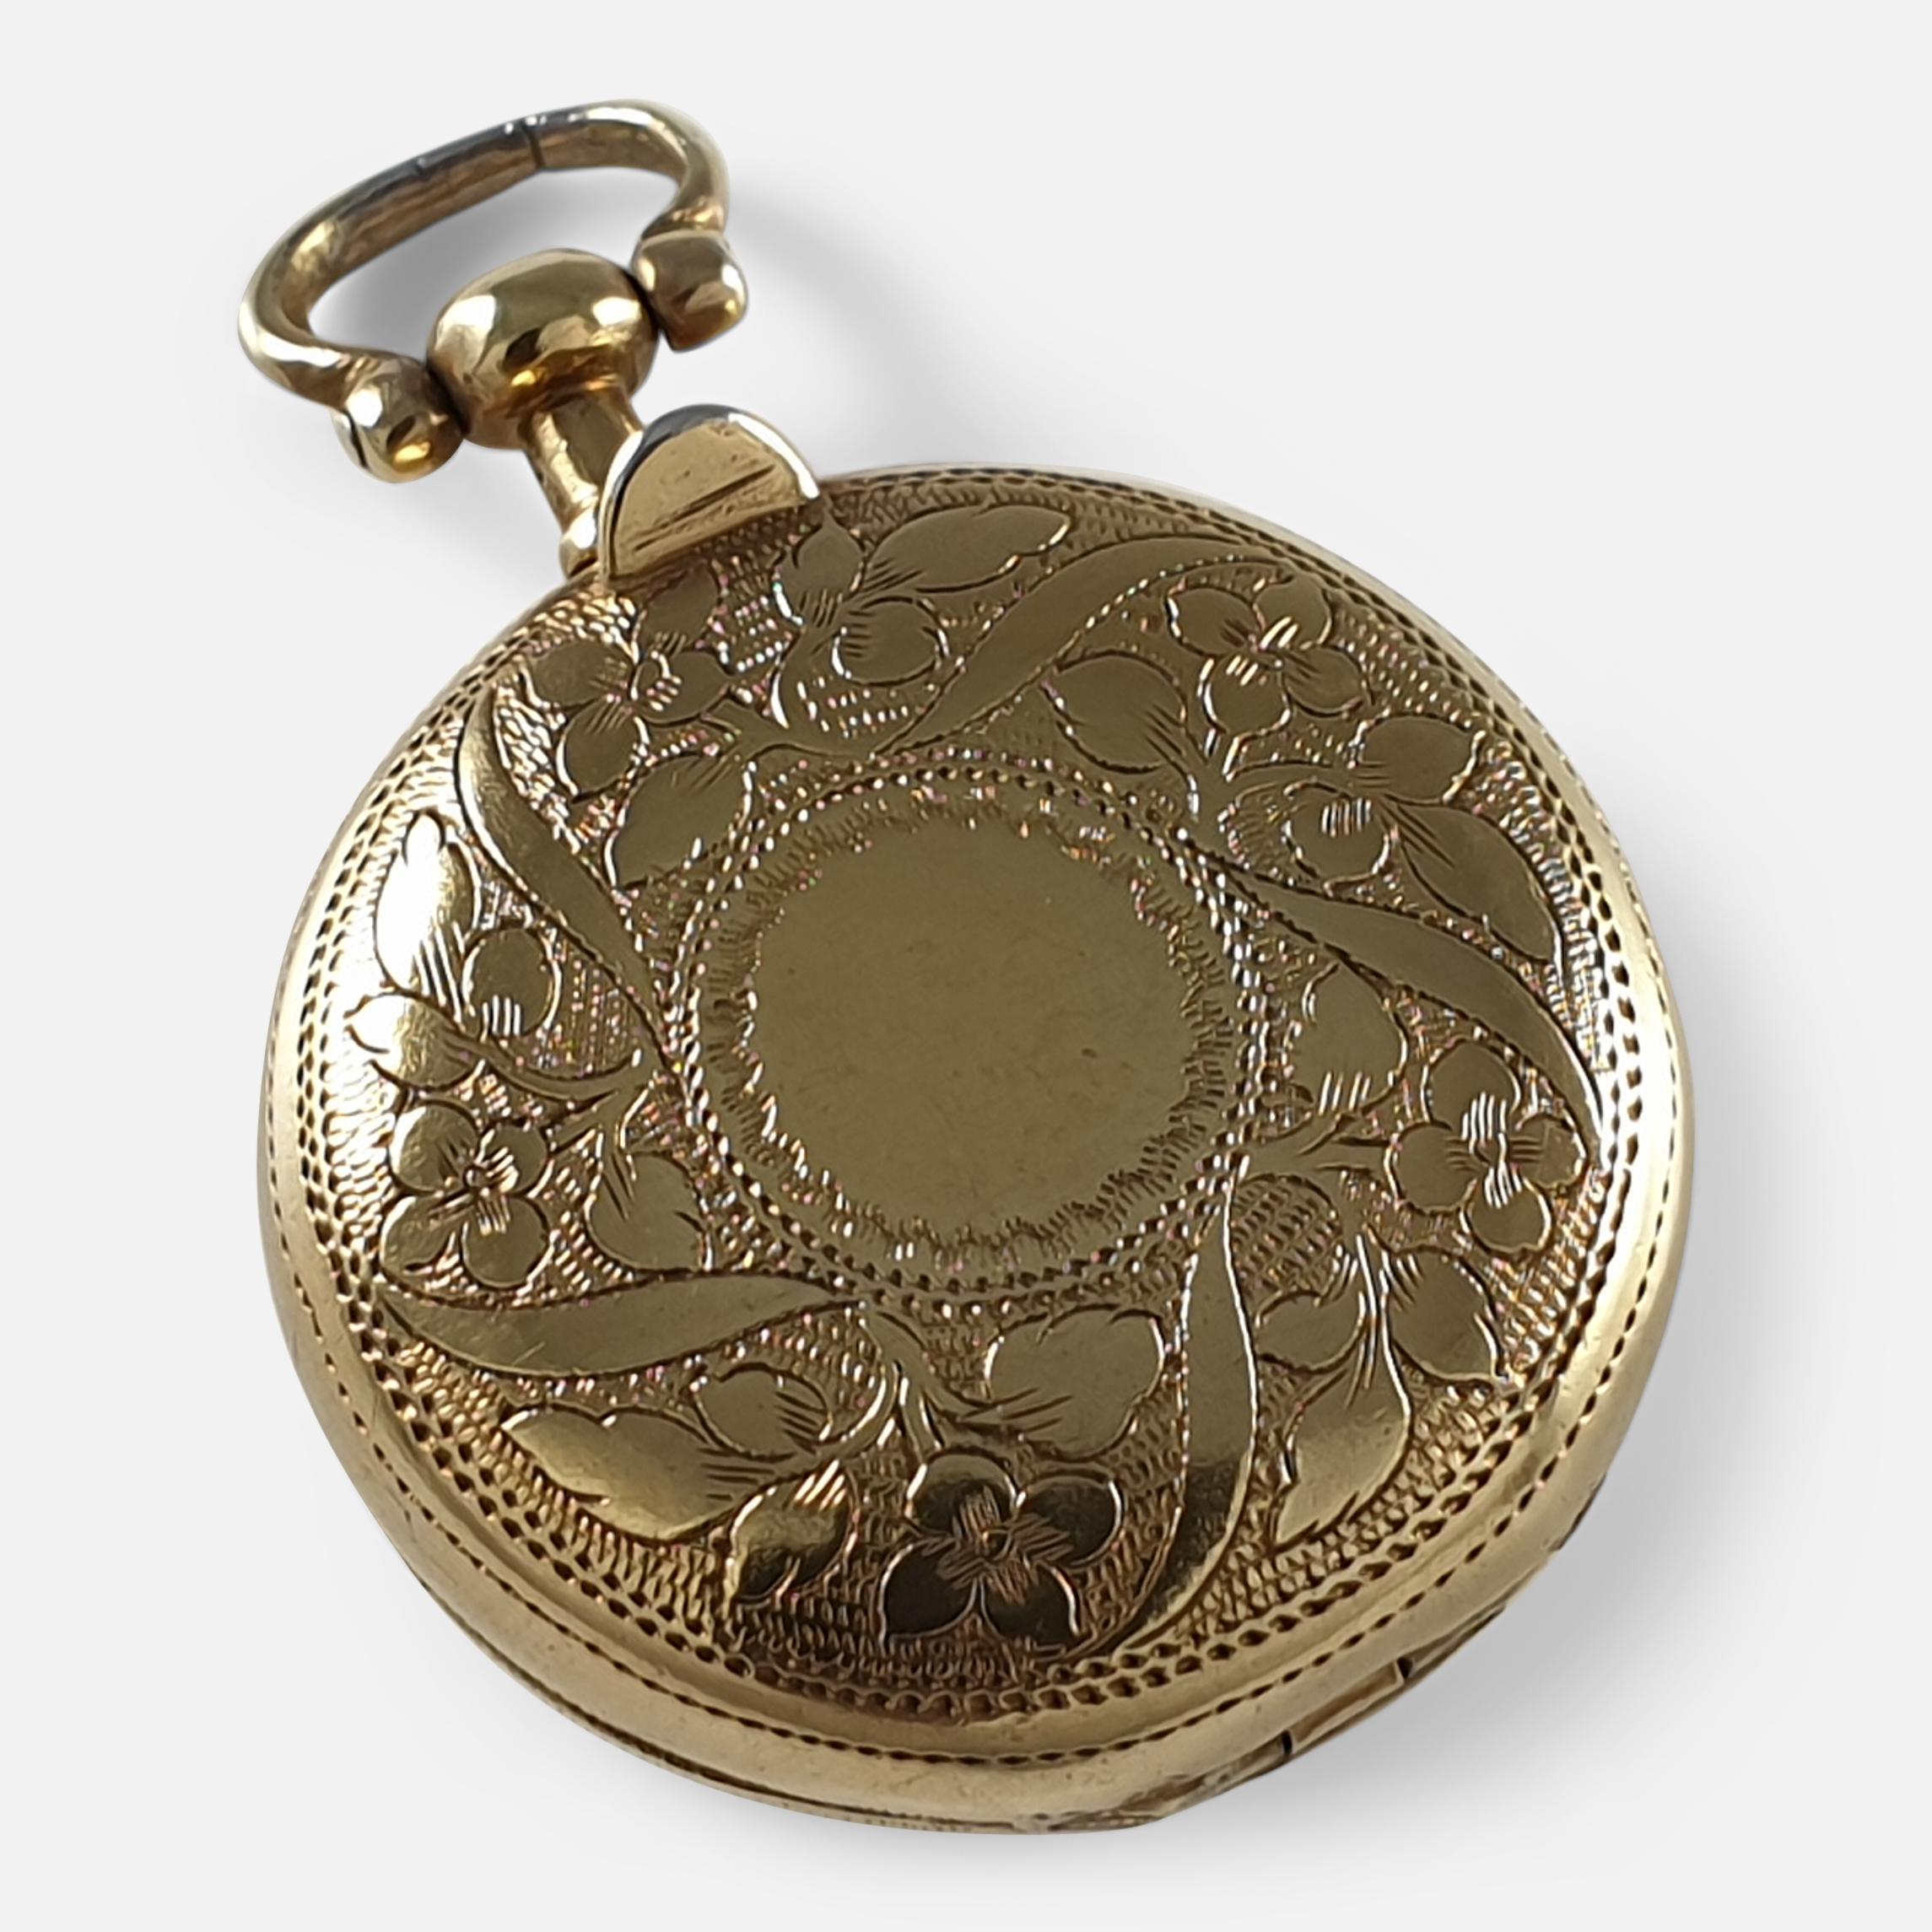 A George III sterling silver gilt Vinaigrette by the silversmith Wardell & Kempson, Birmingham, 1814. The Vinaigrette is of watch case form, engraved foliate decoration, the interior with a hinged, pierced, and engraved foliate scroll grille. The